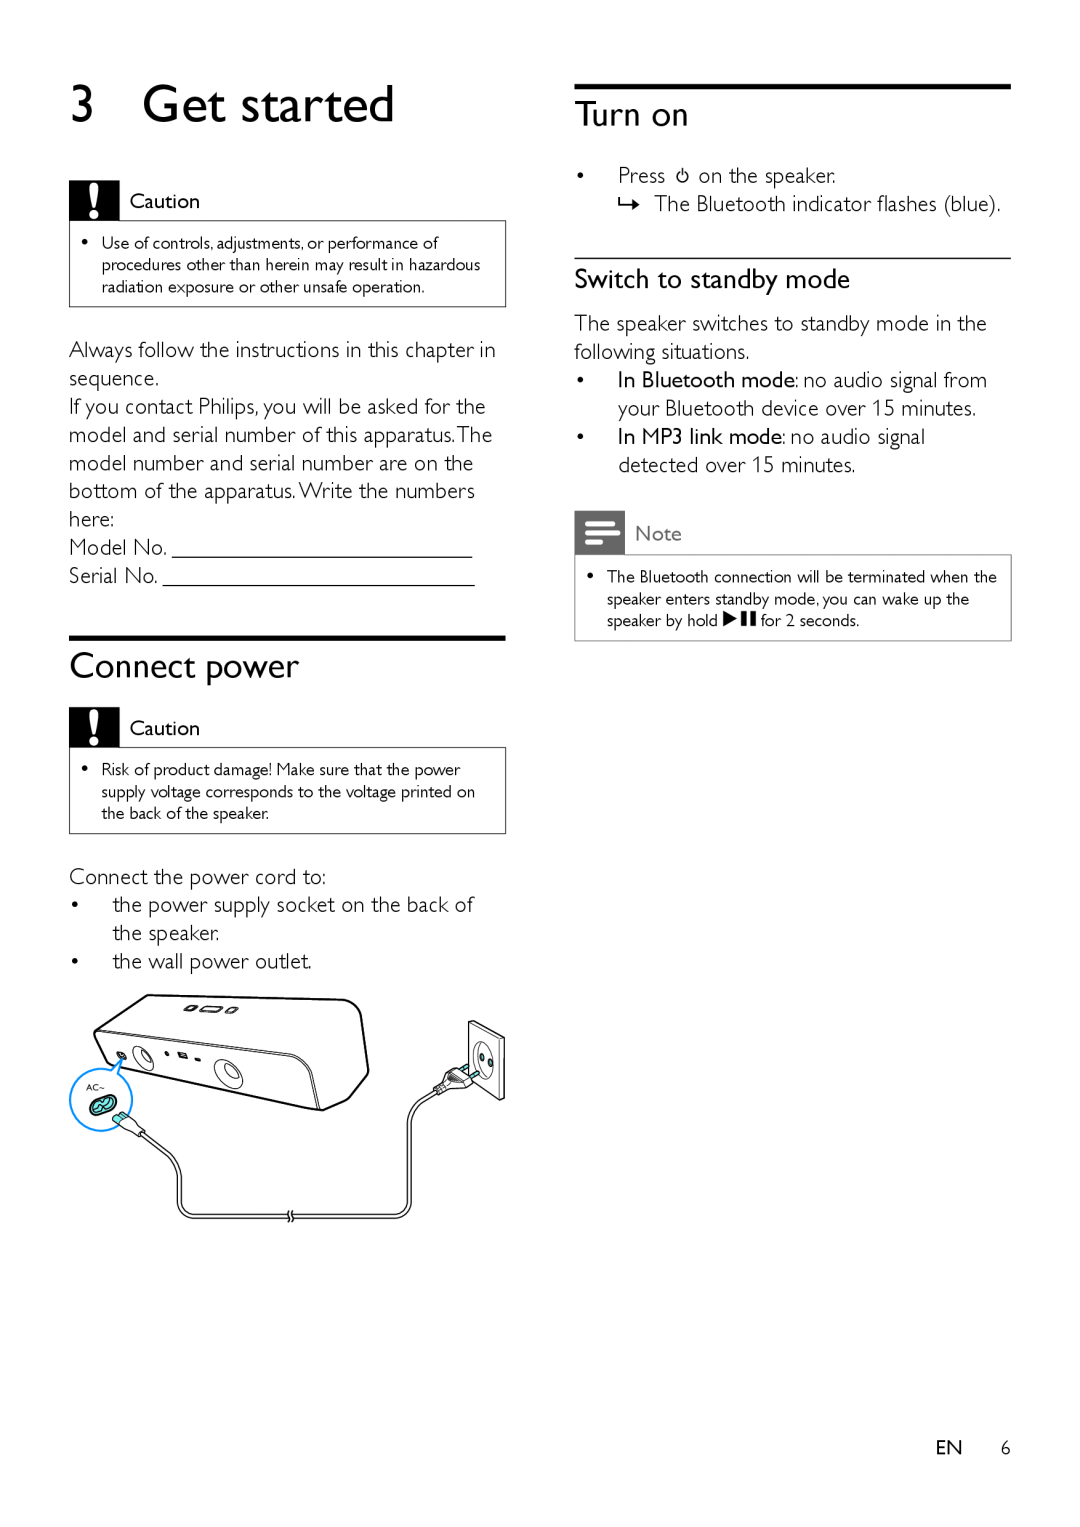 Philips SBT550WHI/12 user manual Get started, Connect power, Turn on, Switch to standby mode 